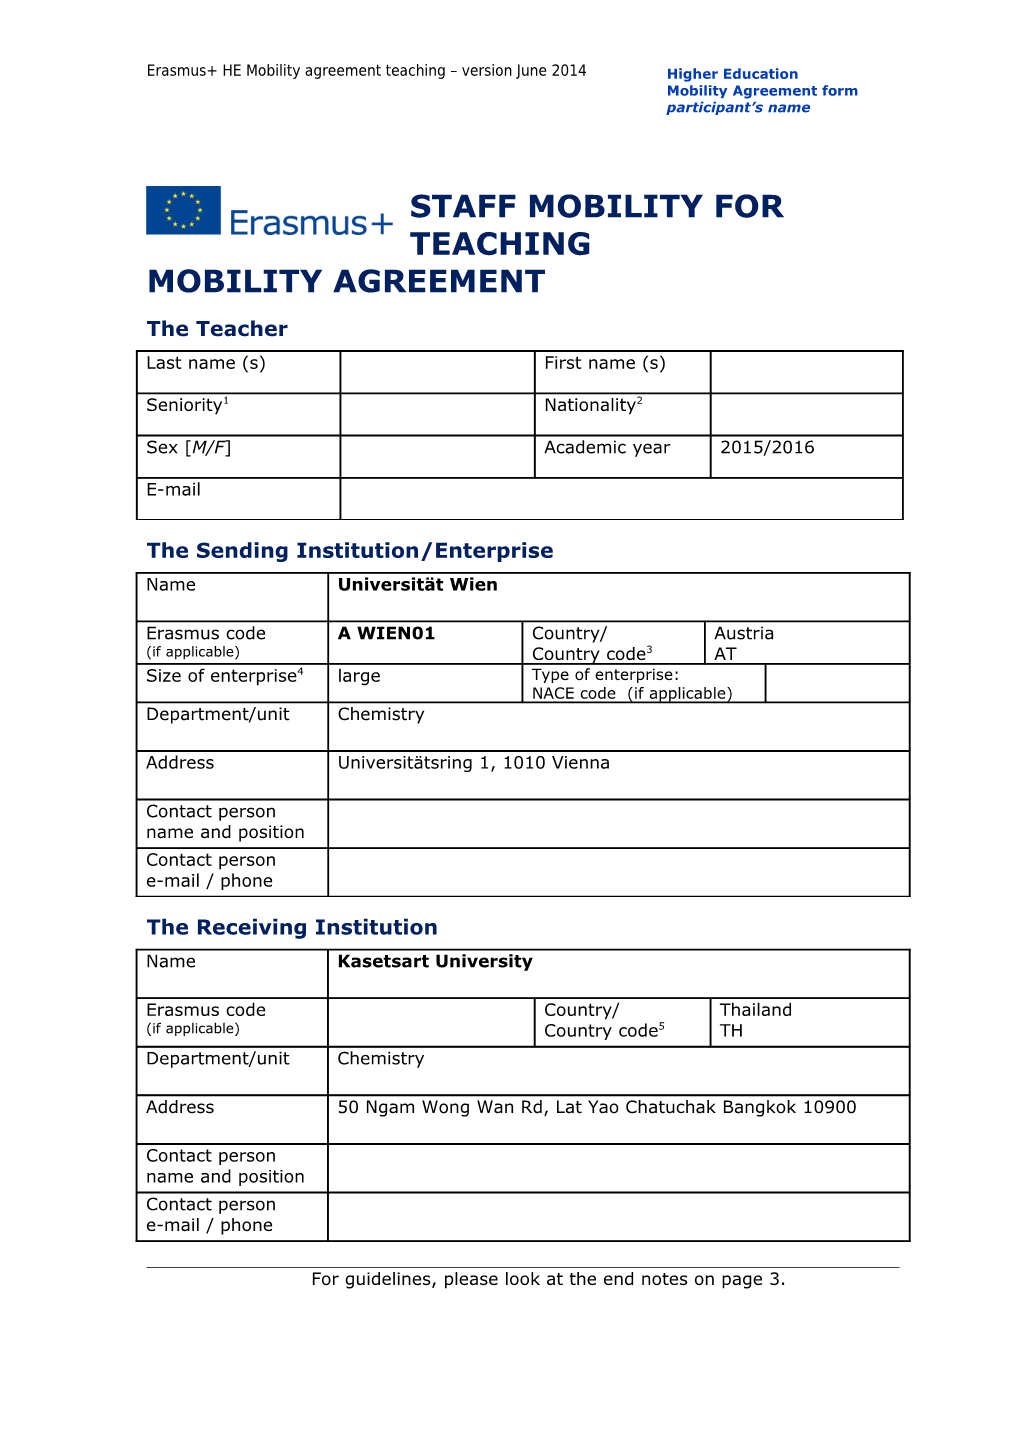 Staff Mobility for Teaching s1